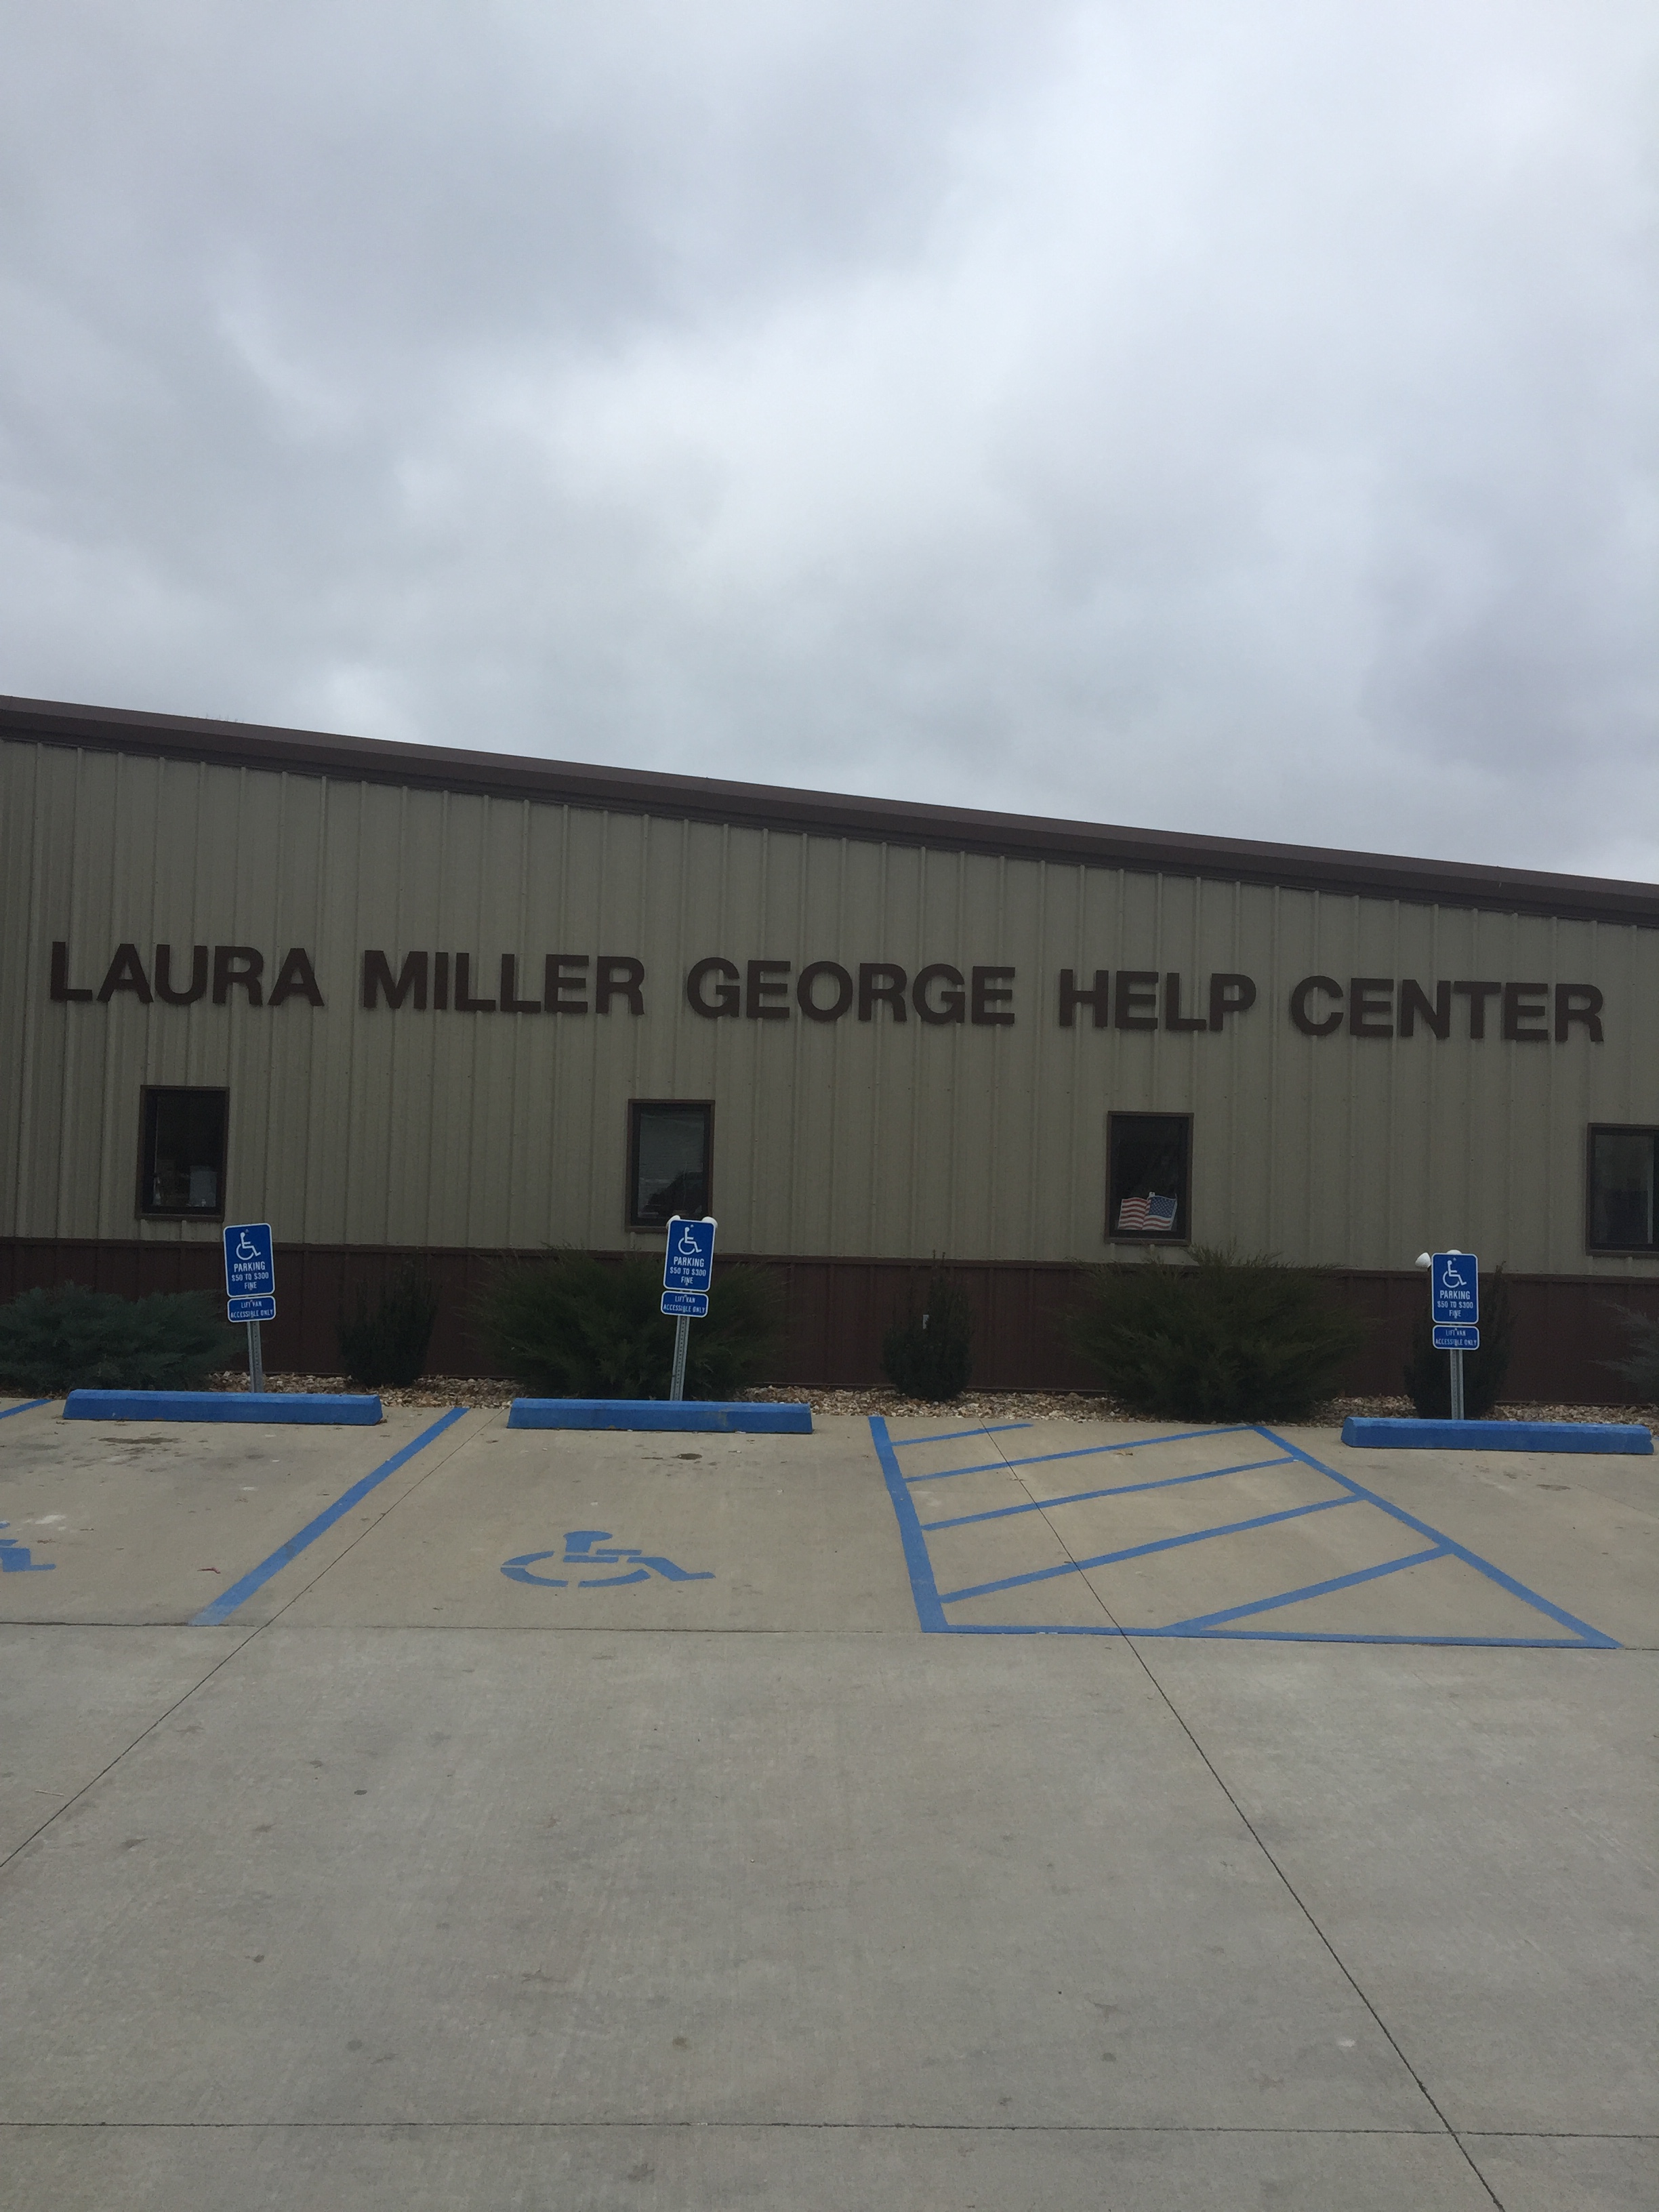 Laura Miller George Help Center In Mexico Is Expanding